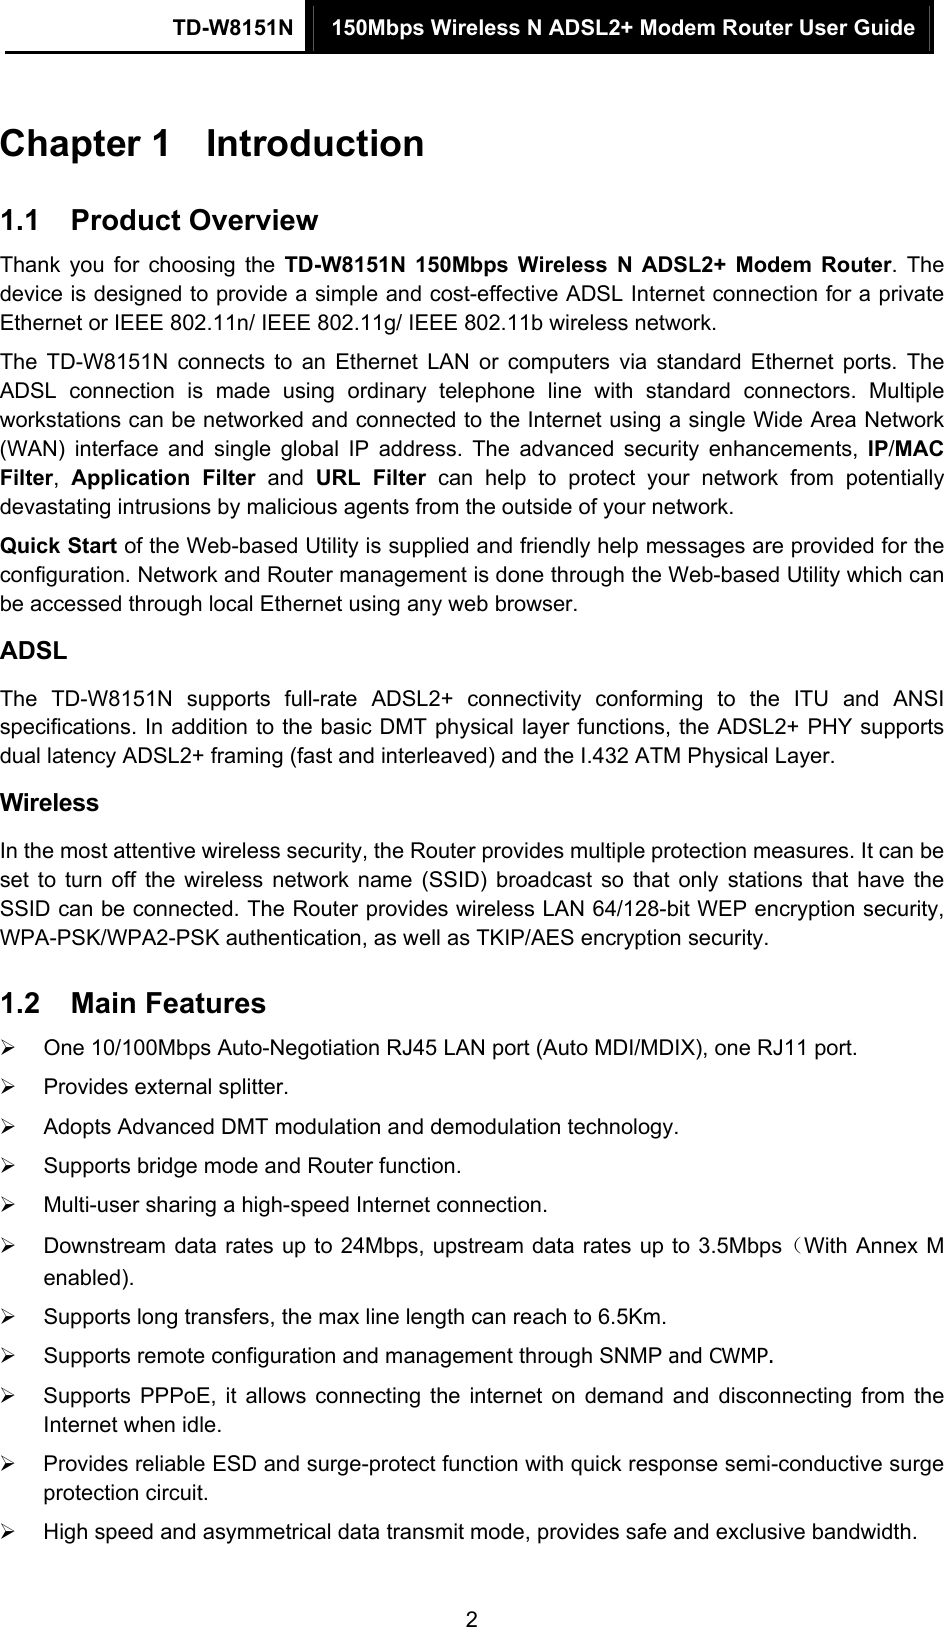 TD-W8151N  150Mbps Wireless N ADSL2+ Modem Router User Guide  2Chapter 1  Introduction 1.1  Product Overview Thank you for choosing the TD-W8151N 150Mbps Wireless N ADSL2+ Modem Router. The device is designed to provide a simple and cost-effective ADSL Internet connection for a private Ethernet or IEEE 802.11n/ IEEE 802.11g/ IEEE 802.11b wireless network. The TD-W8151N connects to an Ethernet LAN or computers via standard Ethernet ports. The ADSL connection is made using ordinary telephone line with standard connectors. Multiple workstations can be networked and connected to the Internet using a single Wide Area Network (WAN) interface and single global IP address. The advanced security enhancements, IP/MAC Filter,  Application Filter and URL Filter can help to protect your network from potentially devastating intrusions by malicious agents from the outside of your network. Quick Start of the Web-based Utility is supplied and friendly help messages are provided for the configuration. Network and Router management is done through the Web-based Utility which can be accessed through local Ethernet using any web browser. ADSL The TD-W8151N supports full-rate ADSL2+ connectivity conforming to the ITU and ANSI specifications. In addition to the basic DMT physical layer functions, the ADSL2+ PHY supports dual latency ADSL2+ framing (fast and interleaved) and the I.432 ATM Physical Layer. Wireless In the most attentive wireless security, the Router provides multiple protection measures. It can be set to turn off the wireless network name (SSID) broadcast so that only stations that have the SSID can be connected. The Router provides wireless LAN 64/128-bit WEP encryption security, WPA-PSK/WPA2-PSK authentication, as well as TKIP/AES encryption security. 1.2  Main Features   One 10/100Mbps Auto-Negotiation RJ45 LAN port (Auto MDI/MDIX), one RJ11 port.   Provides external splitter.   Adopts Advanced DMT modulation and demodulation technology.   Supports bridge mode and Router function.   Multi-user sharing a high-speed Internet connection.   Downstream data rates up to 24Mbps, upstream data rates up to 3.5Mbps（With Annex M enabled).   Supports long transfers, the max line length can reach to 6.5Km.   Supports remote configuration and management through SNMP and CWMP.   Supports PPPoE, it allows connecting the internet on demand and disconnecting from the Internet when idle.   Provides reliable ESD and surge-protect function with quick response semi-conductive surge protection circuit.   High speed and asymmetrical data transmit mode, provides safe and exclusive bandwidth. 